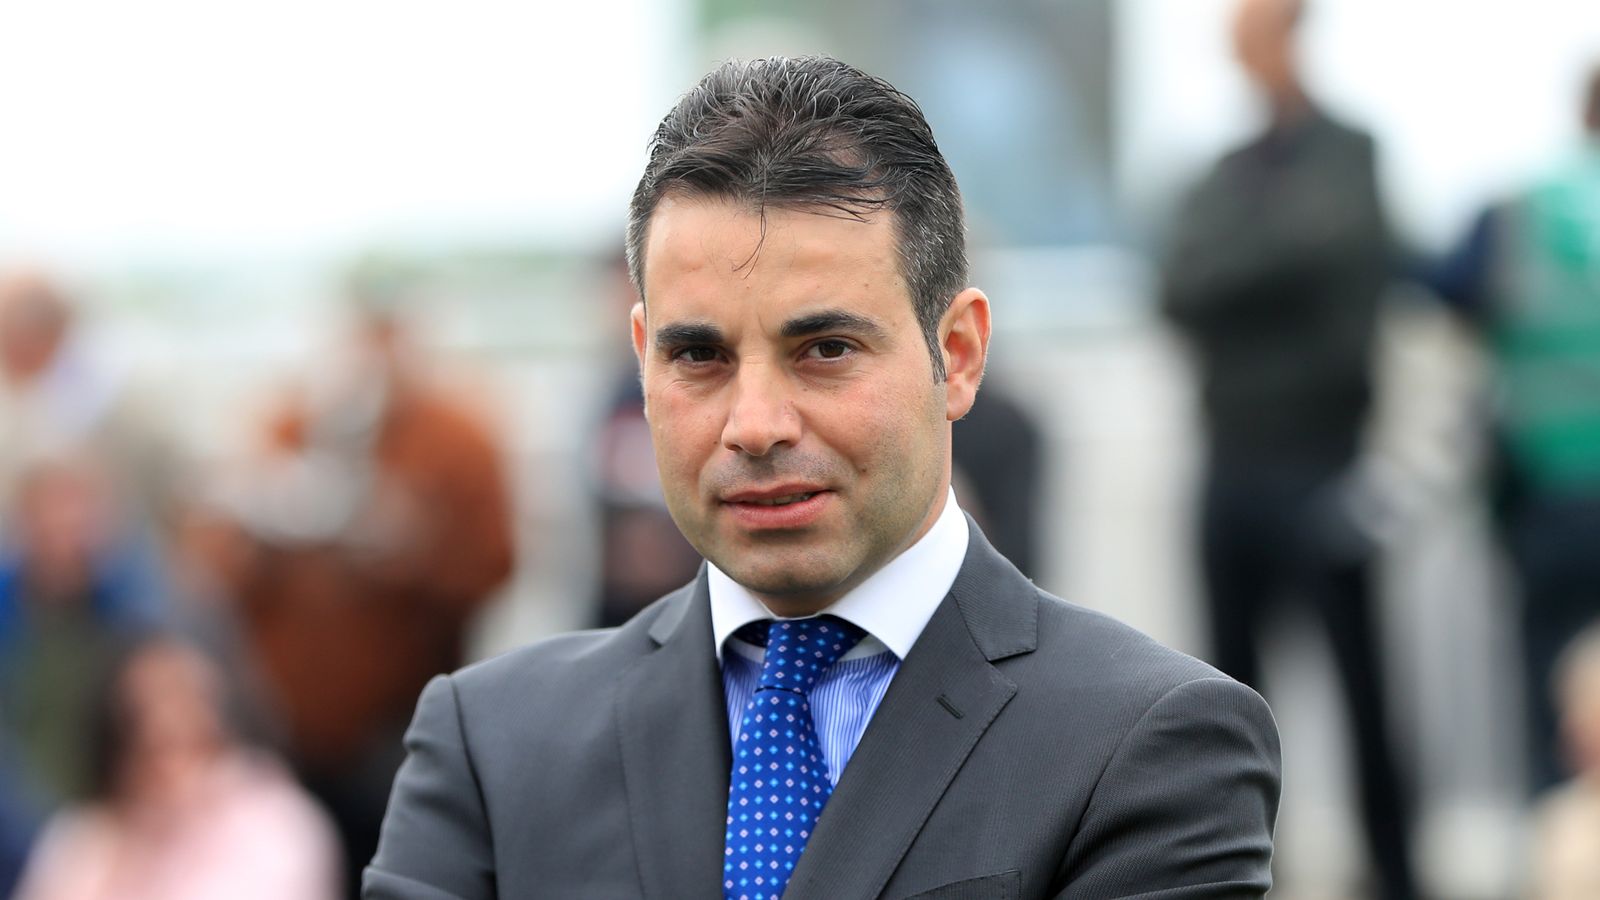 St Leger Stakes: Marco Botti to send Giavellotto straight to Doncaster Classic after Newmarket success